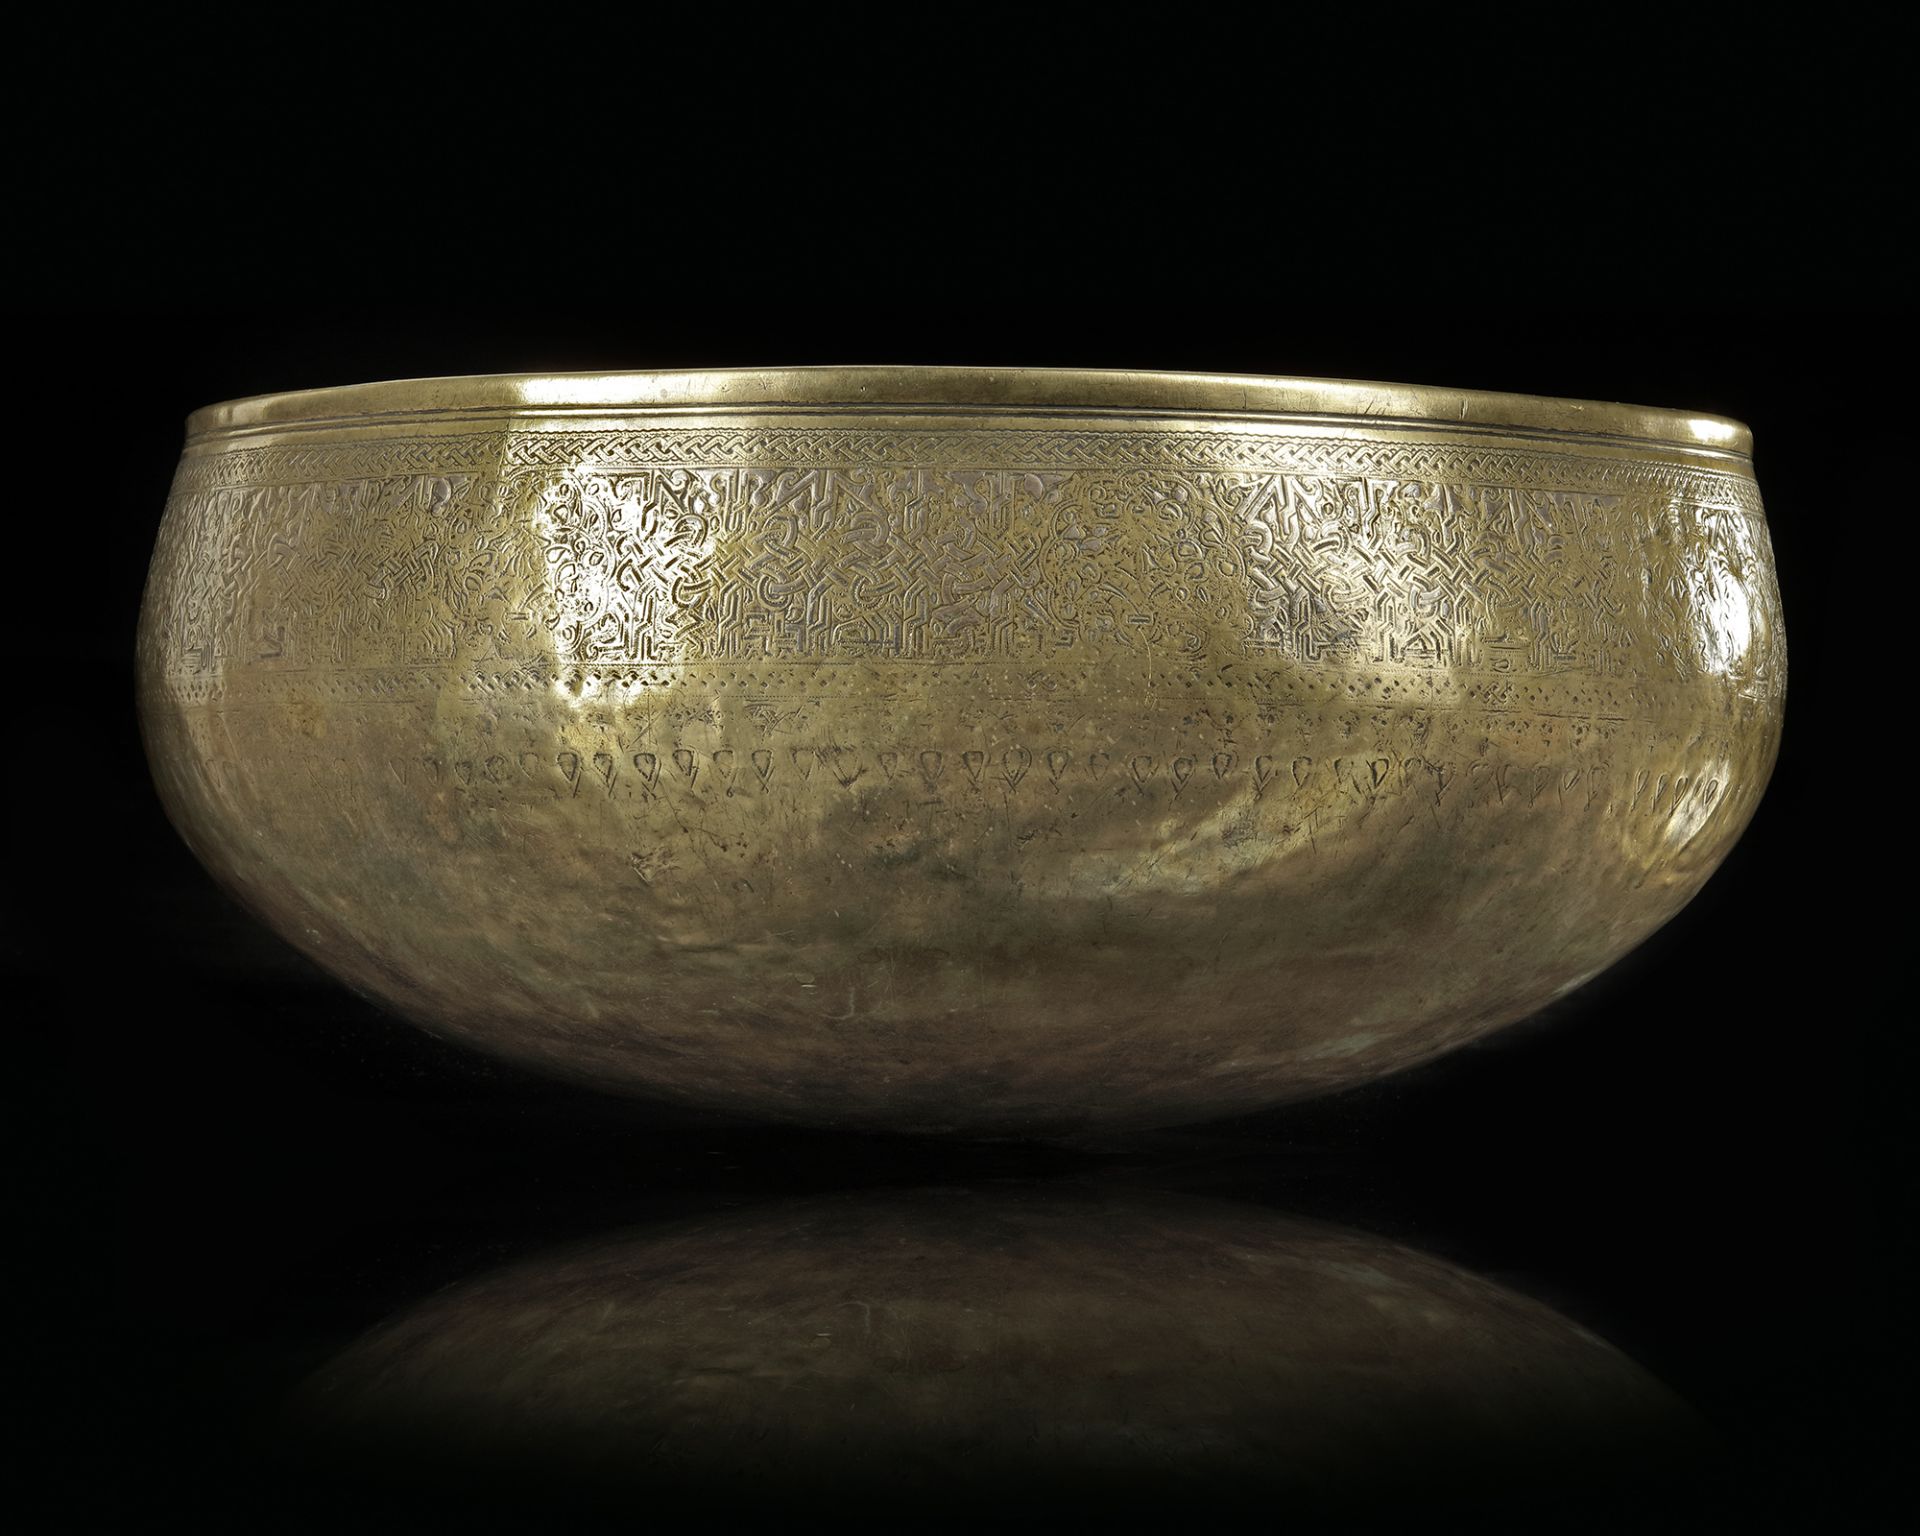 A SILVER INLAID BRASS BOWL, 14TH CENTURY - Image 4 of 10